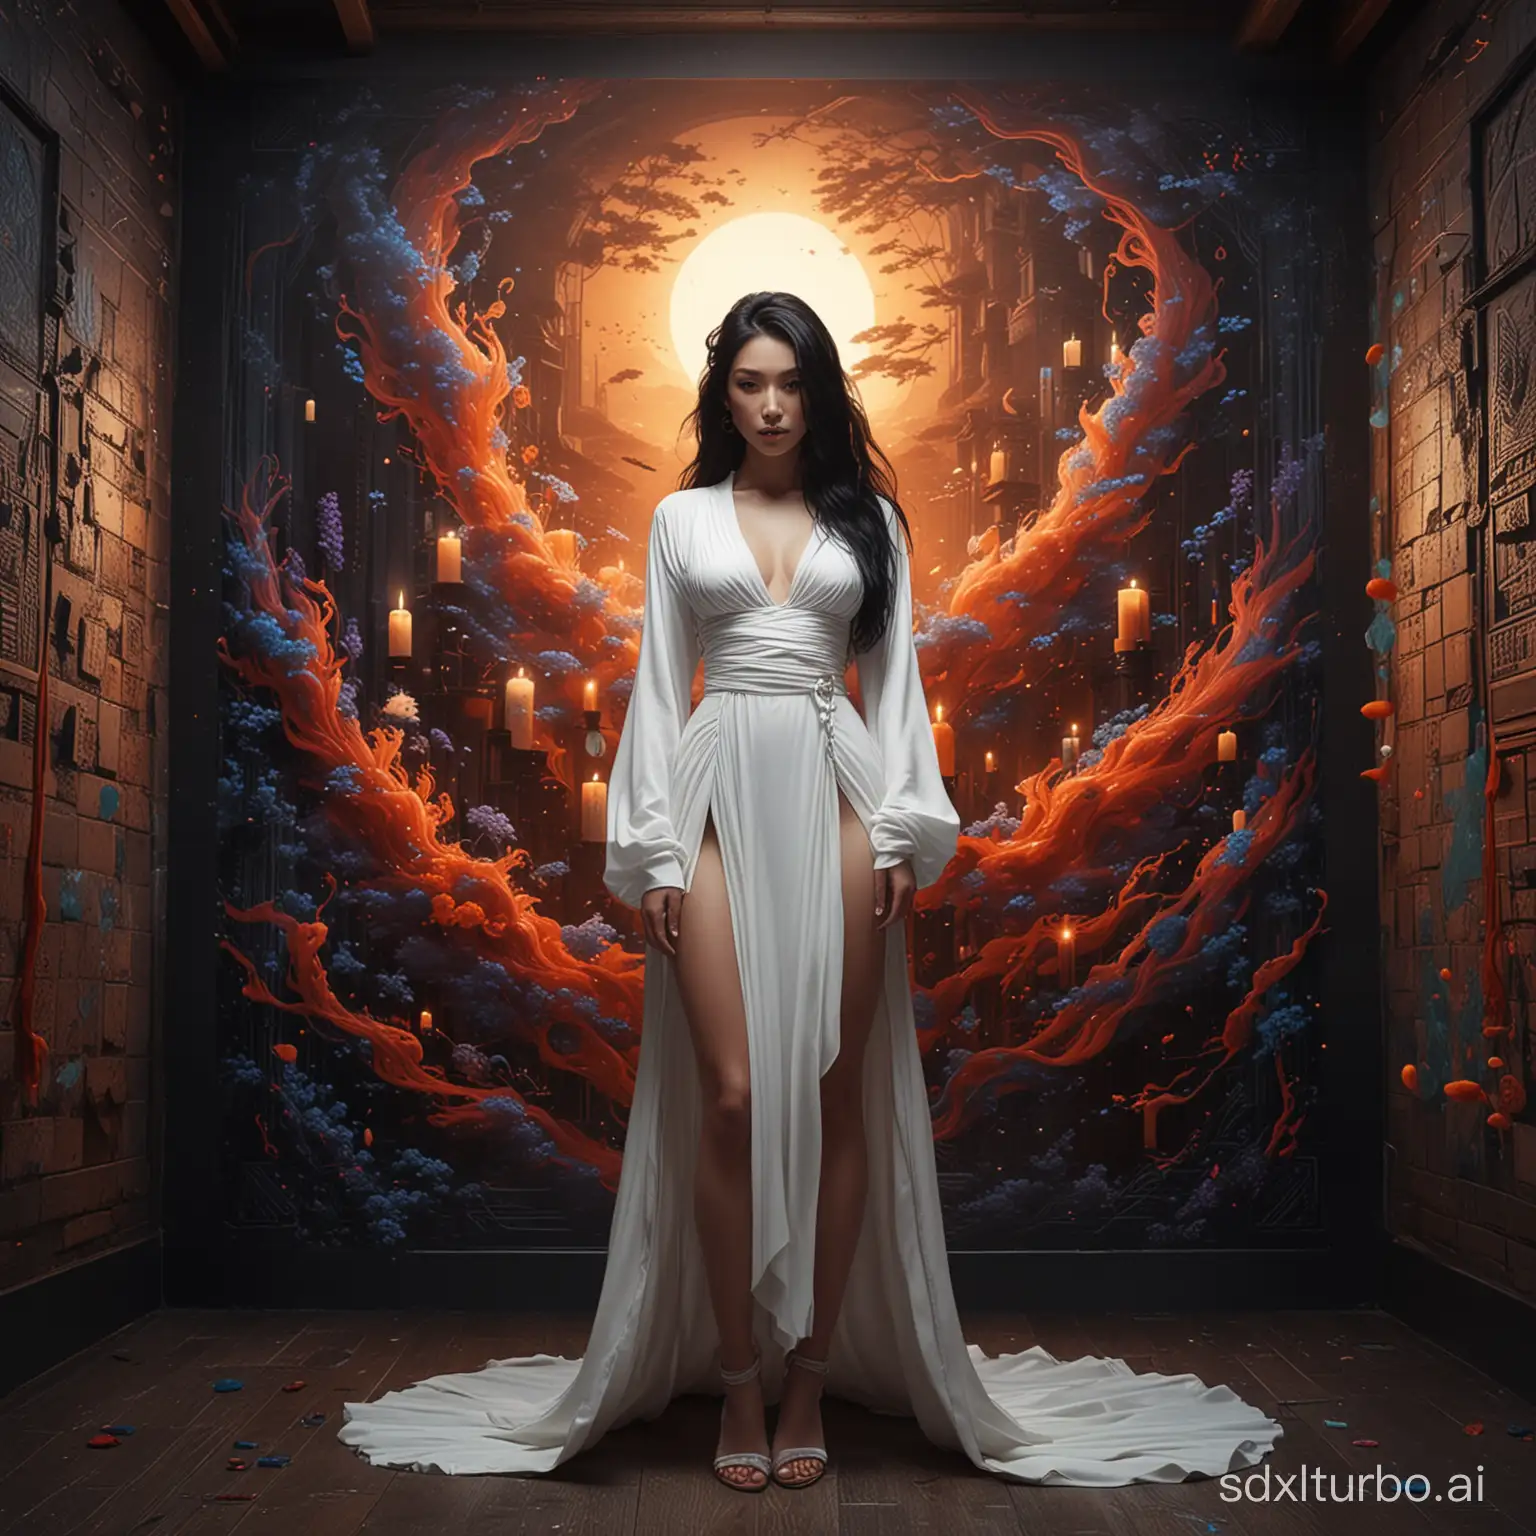 A captivating, futuristic portrait of a powerful female warrior, adorned. open chest and big ass showing, Her long, black hair flows like a fiery explosion of colors, with strands swirling around her. She wears a short, white dress, accentuating her sleek and sophisticated silhouette. The dimly lit room is adorned with candles, casting warm and soft shadows on the walls that create an air of mystery and elegance. Her intense gaze captivates viewers, while the vibrant background features a blend of conceptual art, wildlife photography, painting, and illustration. The overall ambiance is dark fantasy, with a touch of anime and 3D render, creating a striking and unforgettable image., product, typography, ukiyo-e, wildlife photography, 3d render, illustration, cinematic, graffiti, architecture, poster, painting, vibrant, fashion, conceptual art, portrait photography, anime, dark fantasy, photo